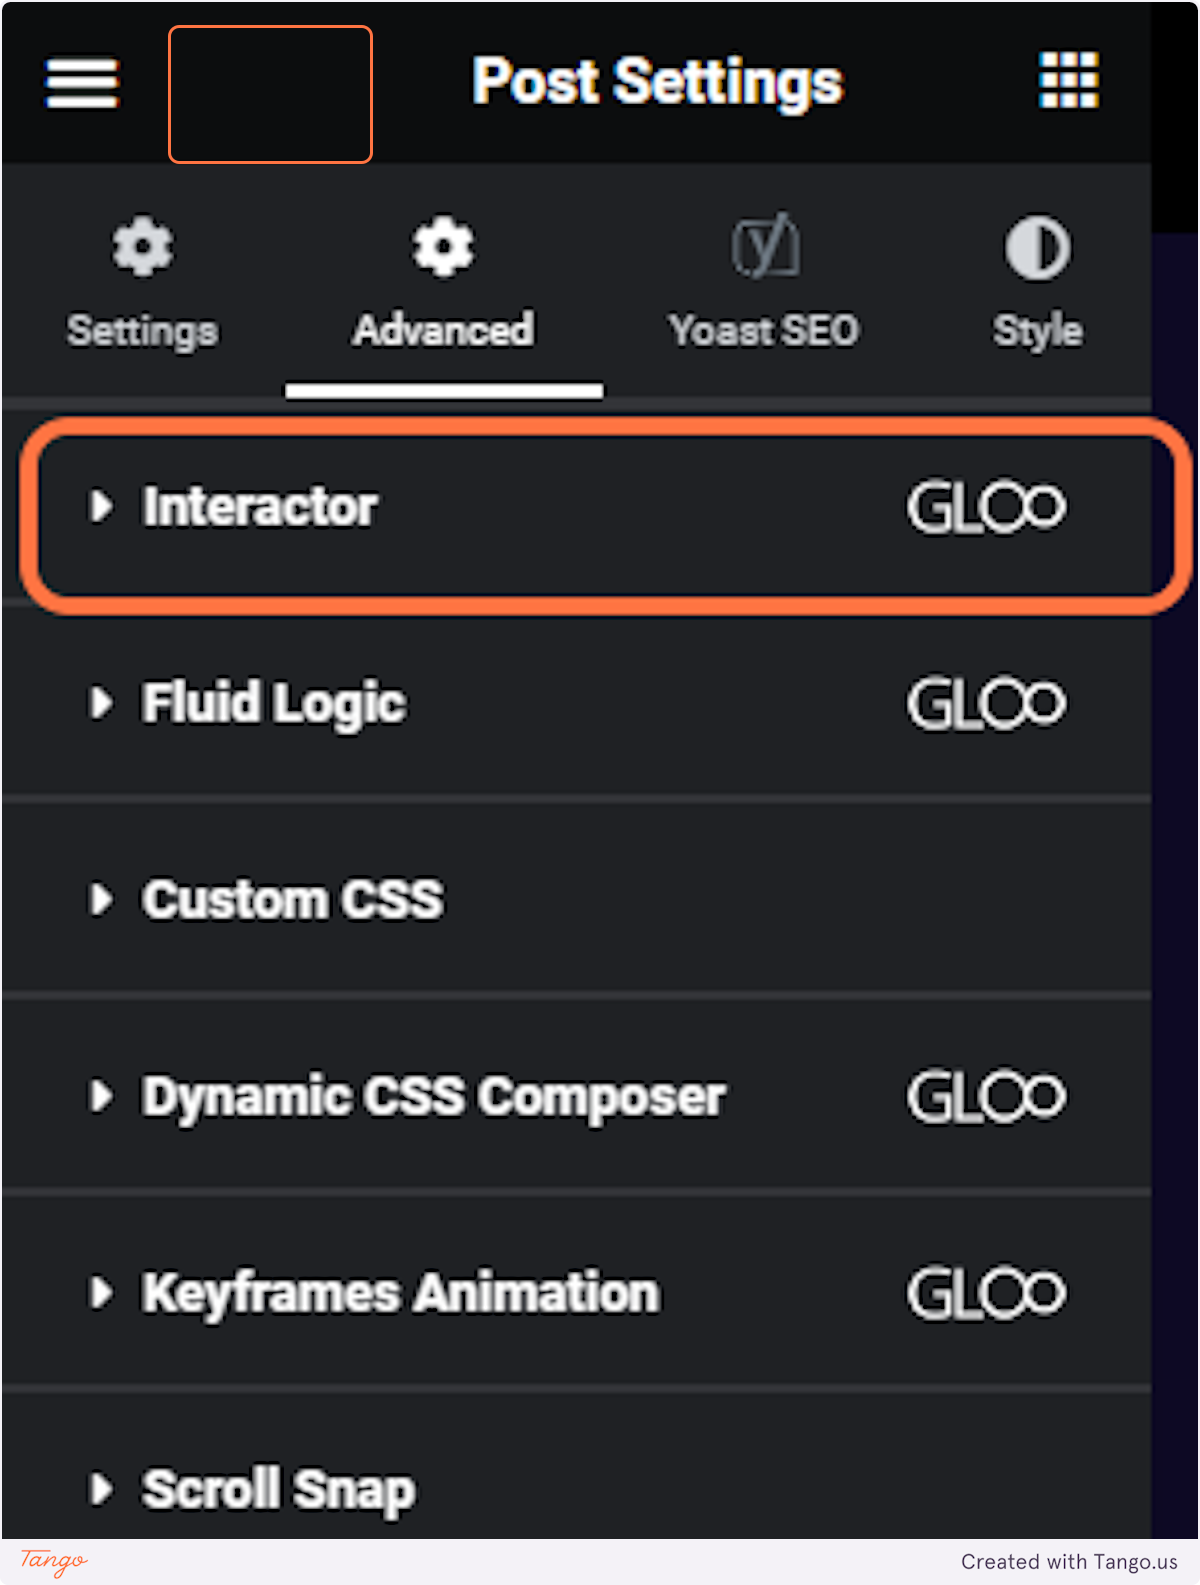 Click on the gloo icon on the top bar to access interactor